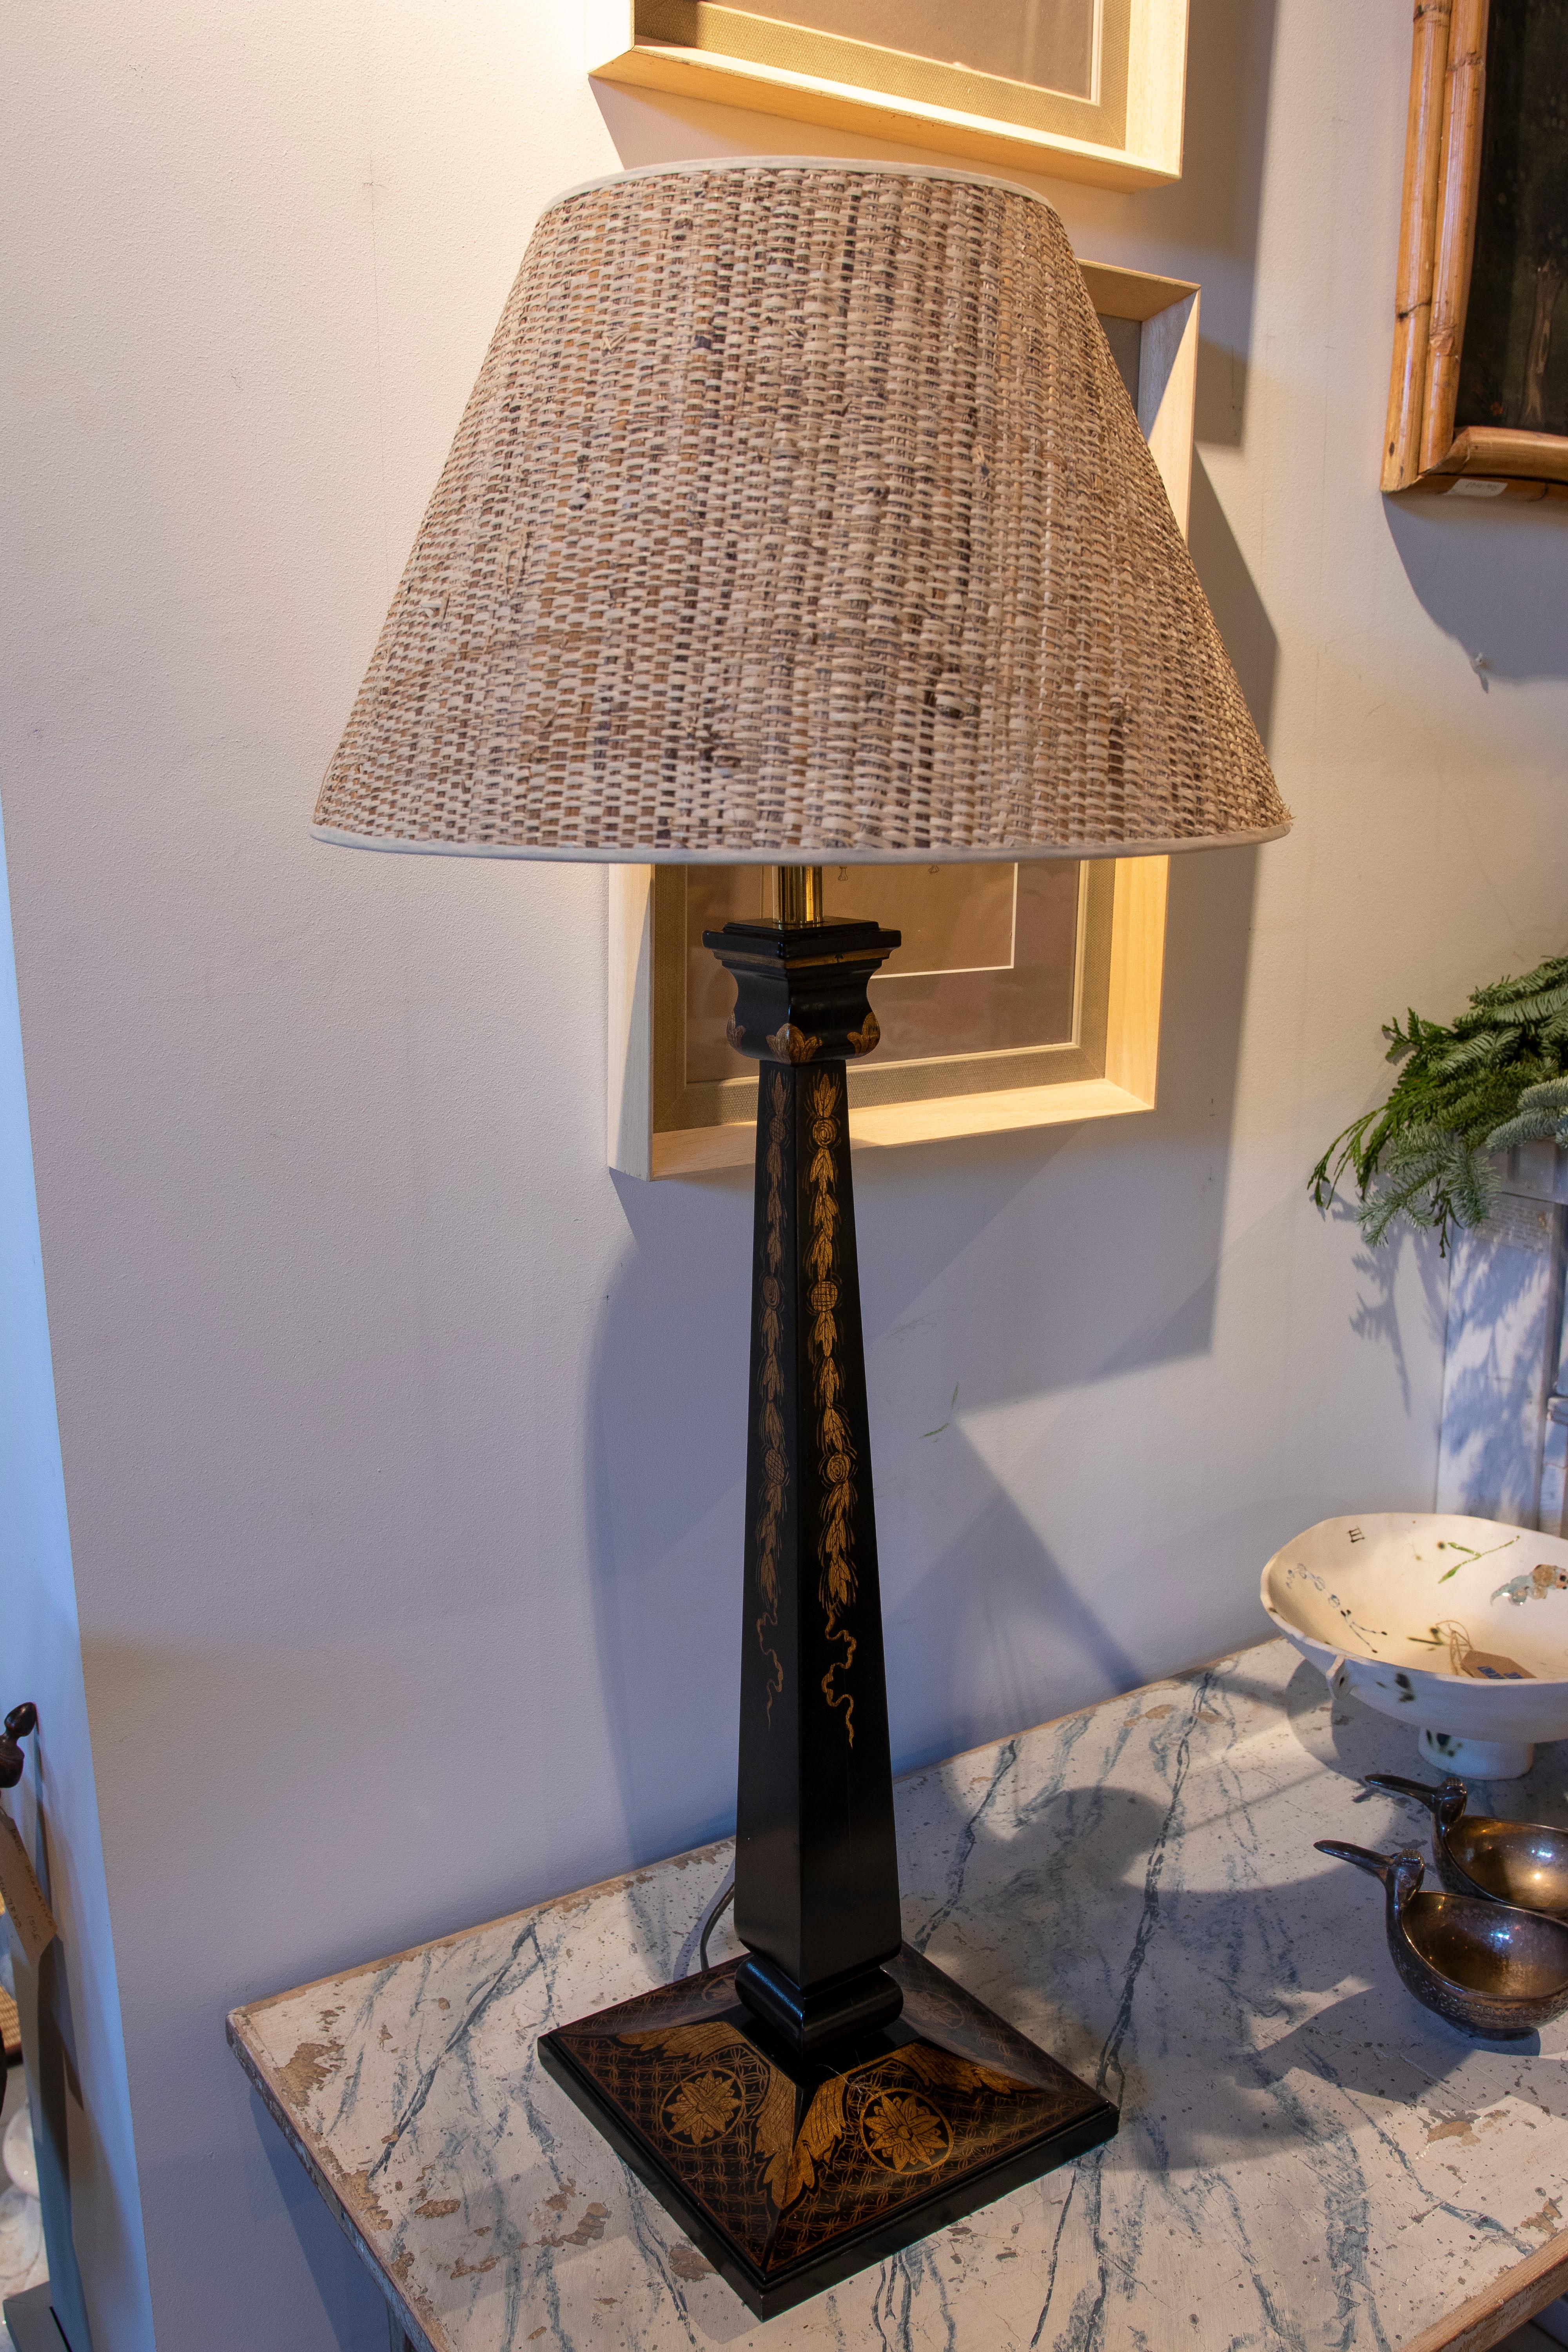 Pair of wooden lamps in black with gold flower decoration.
The measurement is without screen.